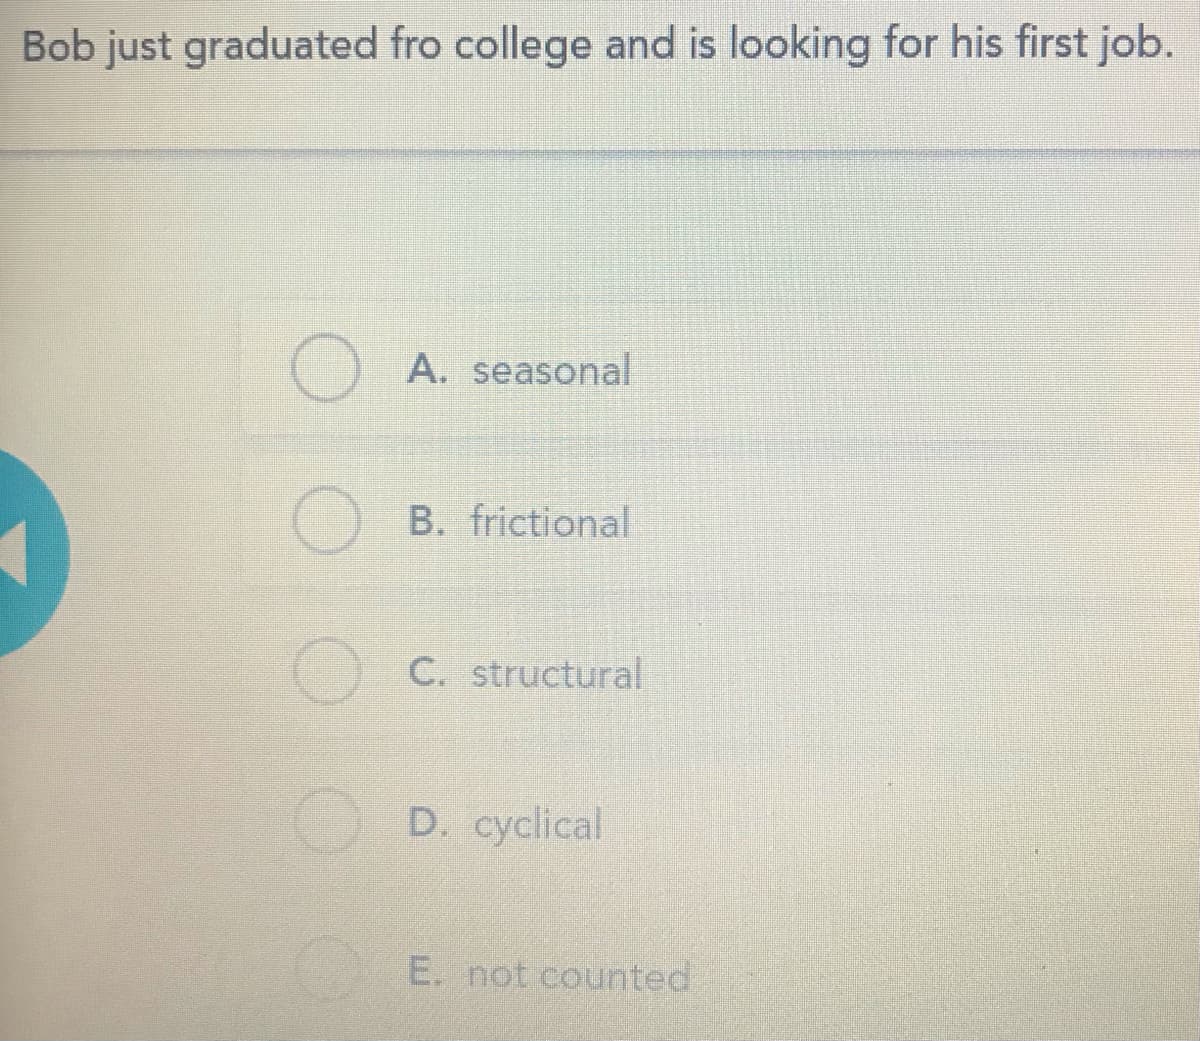 Bob just graduated fro college and is looking for his first job.
O A. seasonal
O B. frictional
C. structural
D. cyclical
E. not counted
